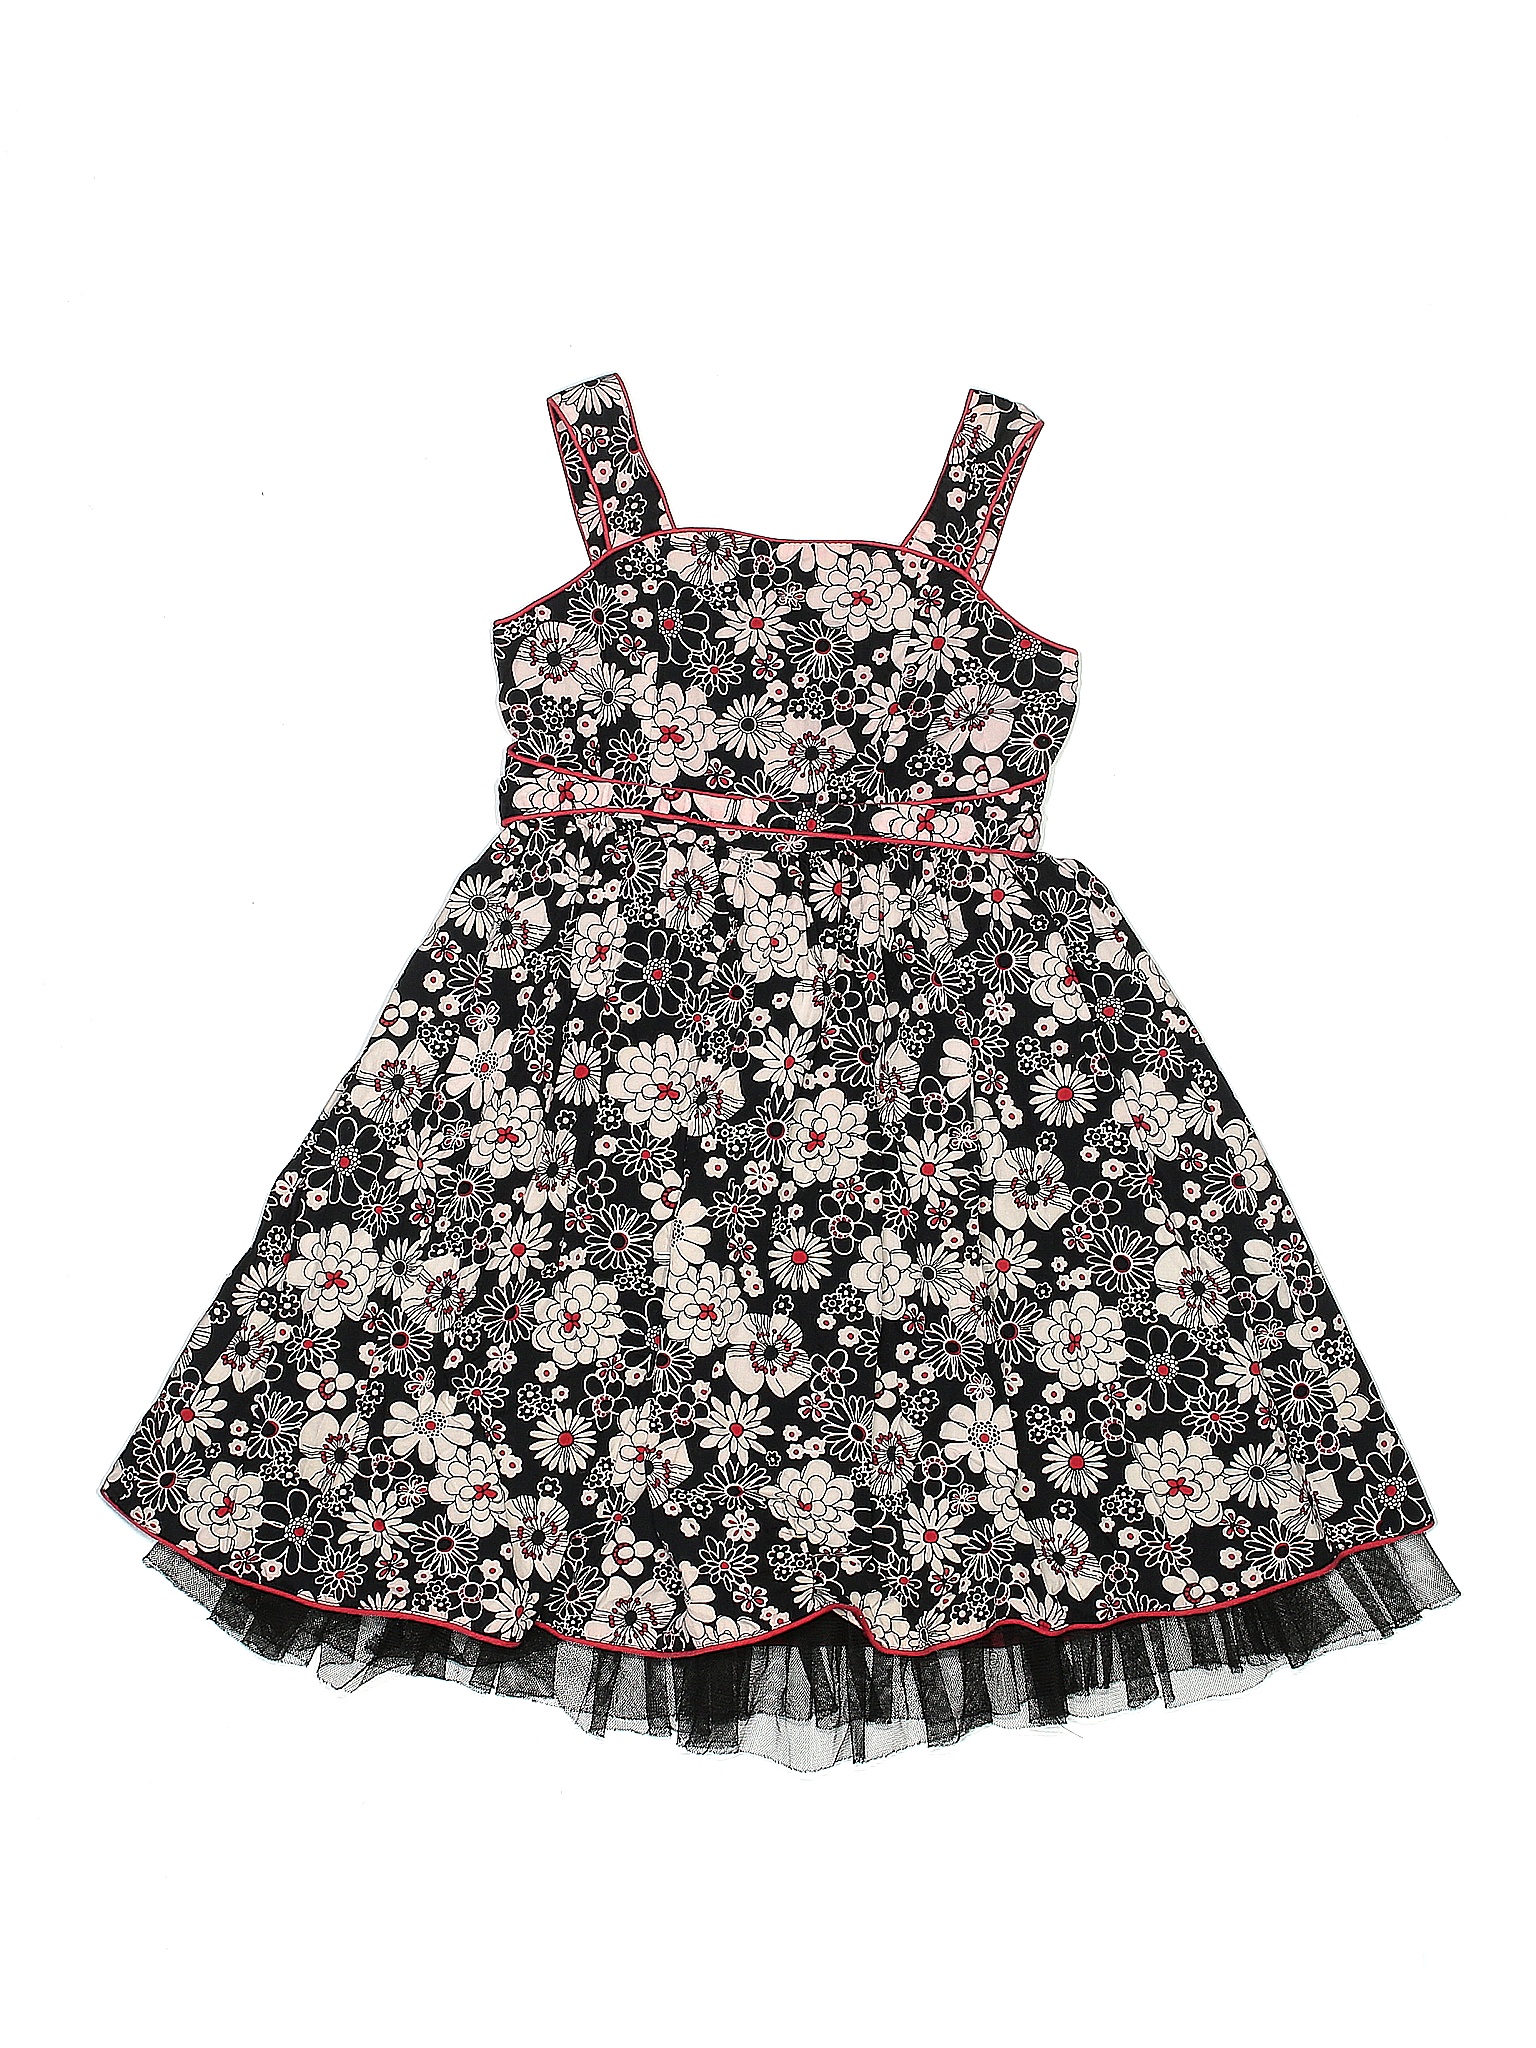 Sweet Heart Rose Girls' Clothing On Sale Up To 90% Off Retail | thredUP